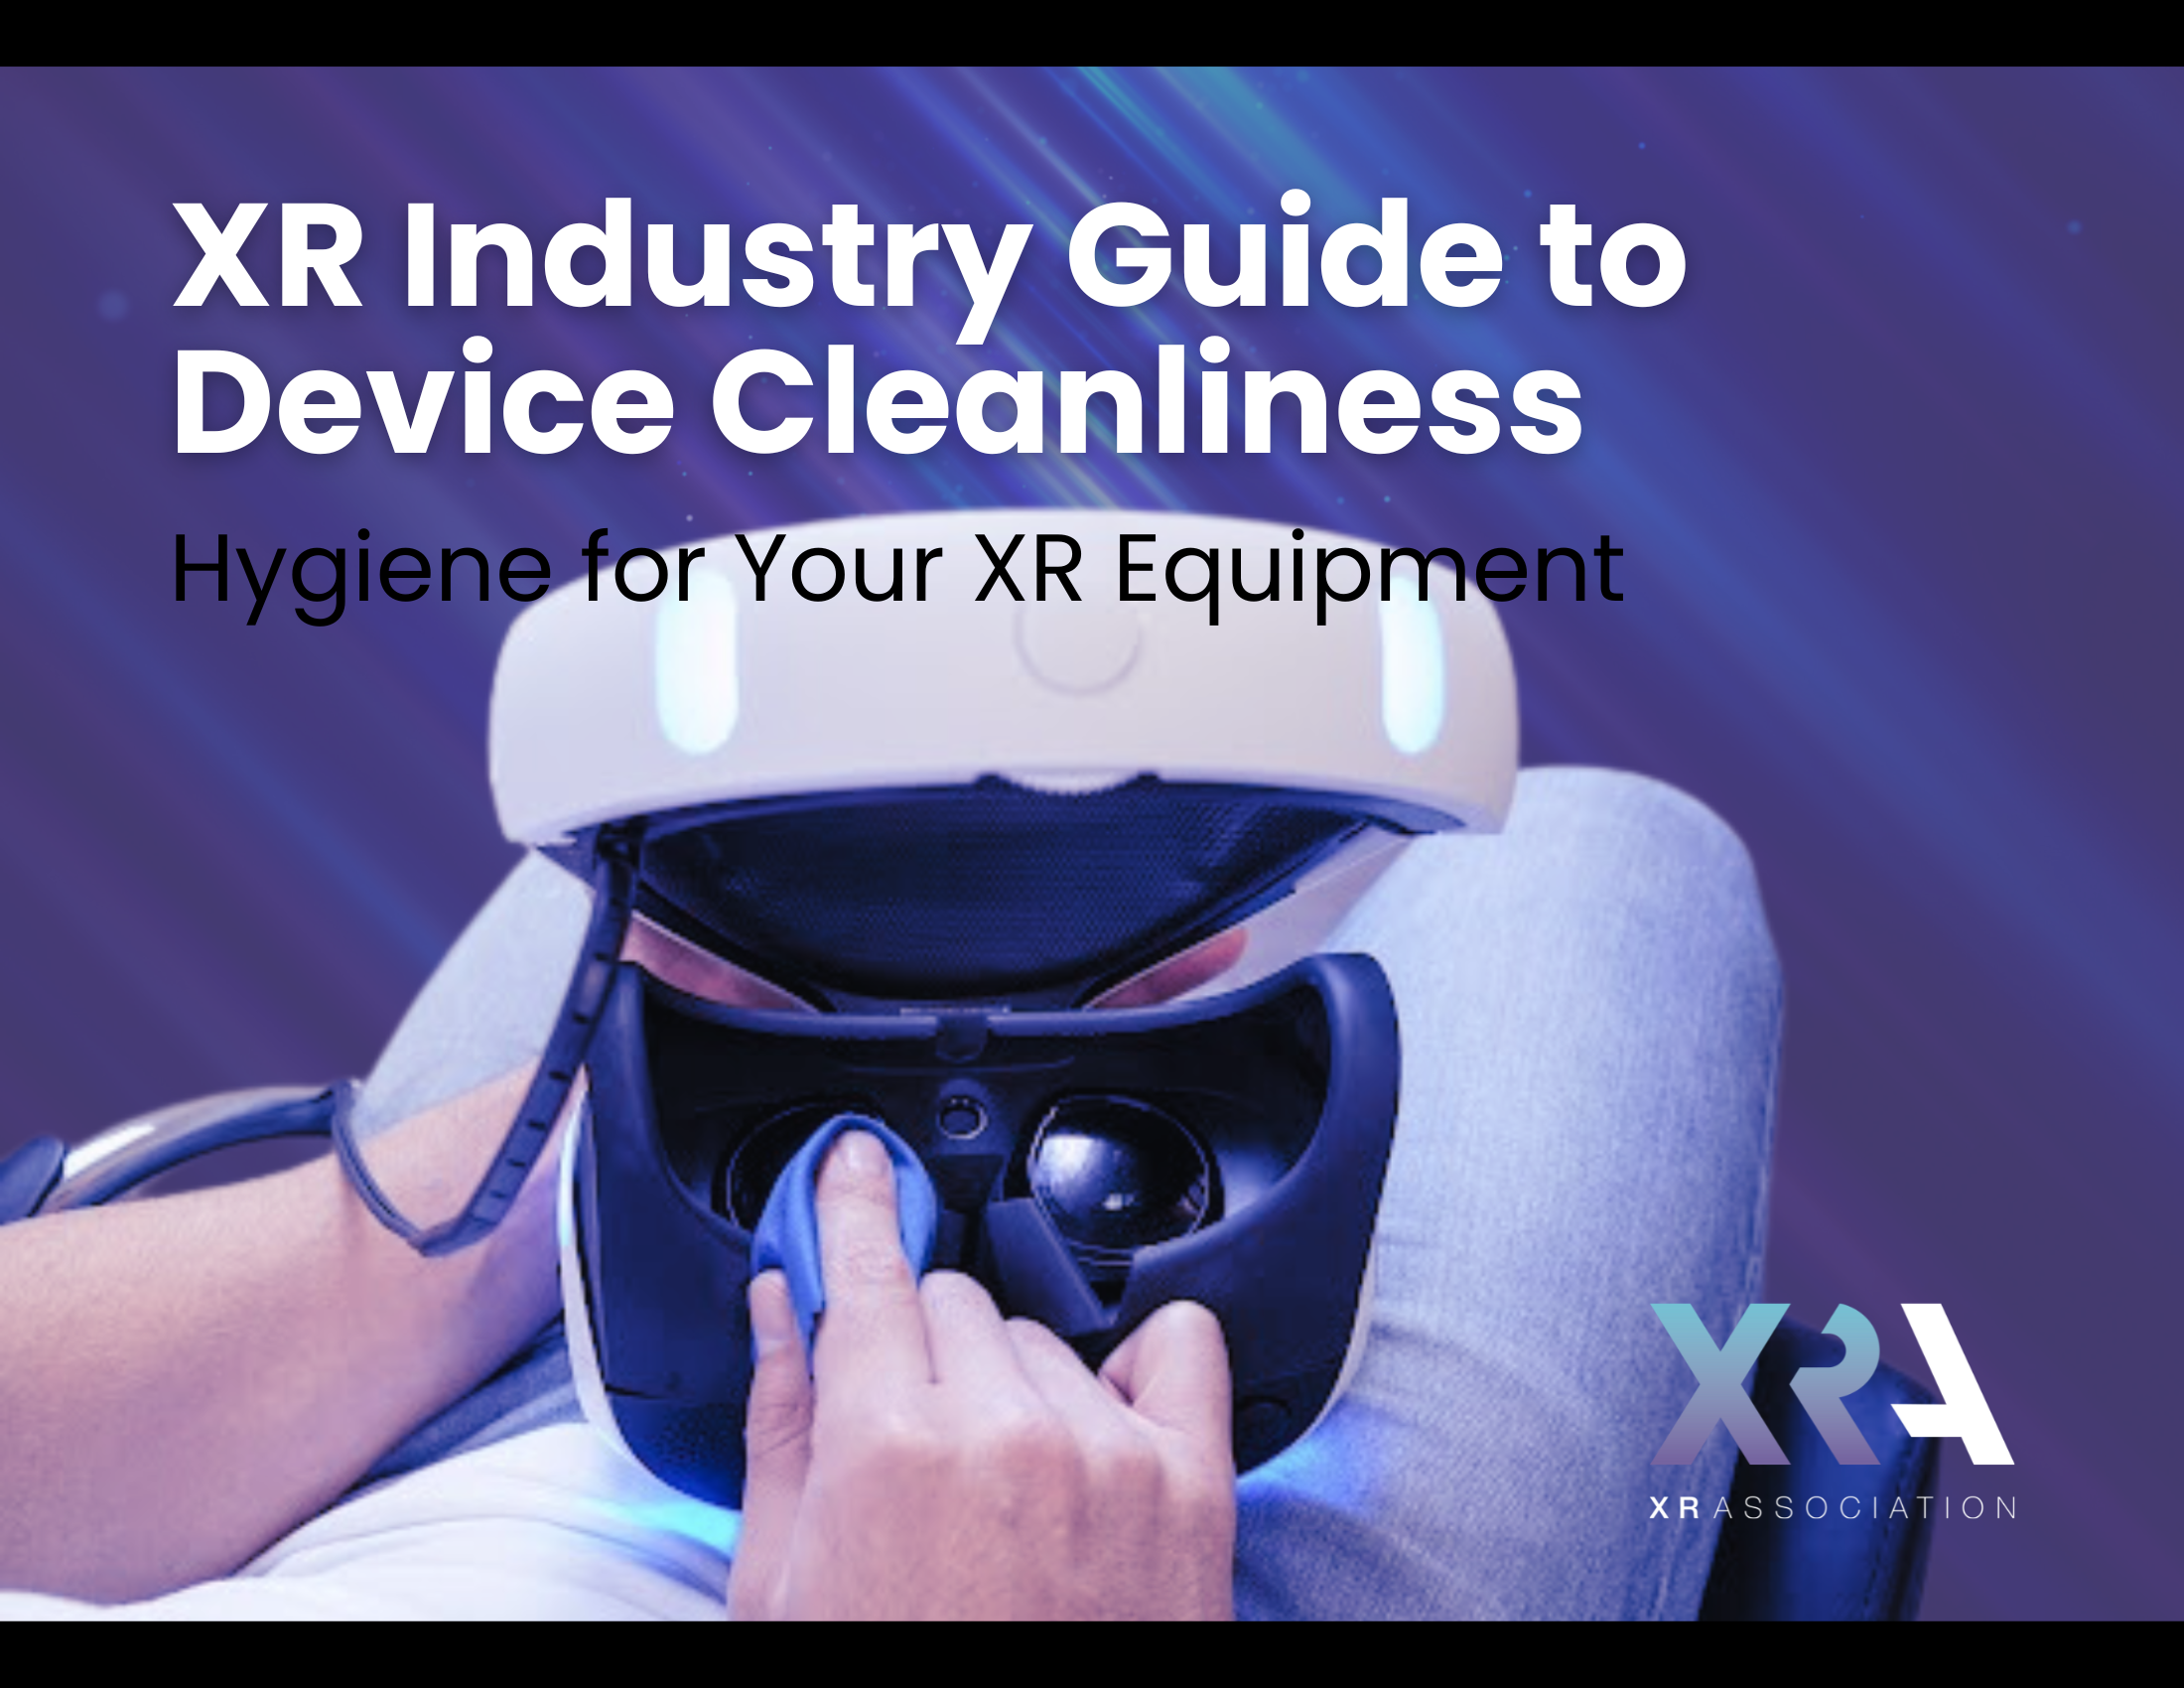 XR INDUSTRY GUIDE TO DEVICE CLEANLINESS